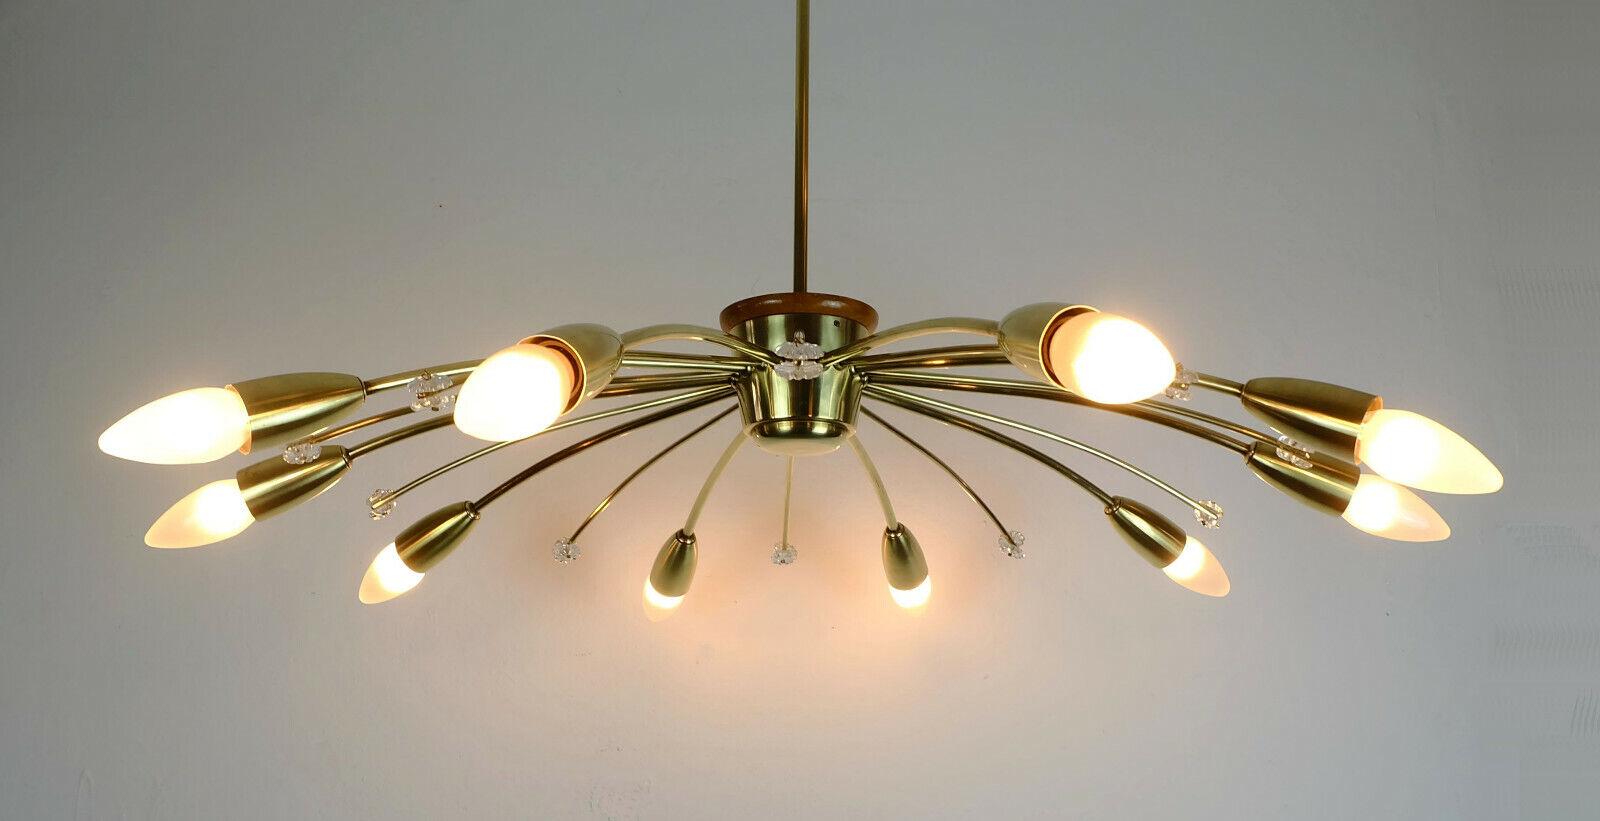 Very beautiful large 1950s ceiling lamp manufactured by Rupert Nikoll, Austria. Made of brass, the center part is made of lacquered wood. 10 arms, between each arm is a deco element with 2 small glass blossoms. Holds E14 bulbs (not included).

Very